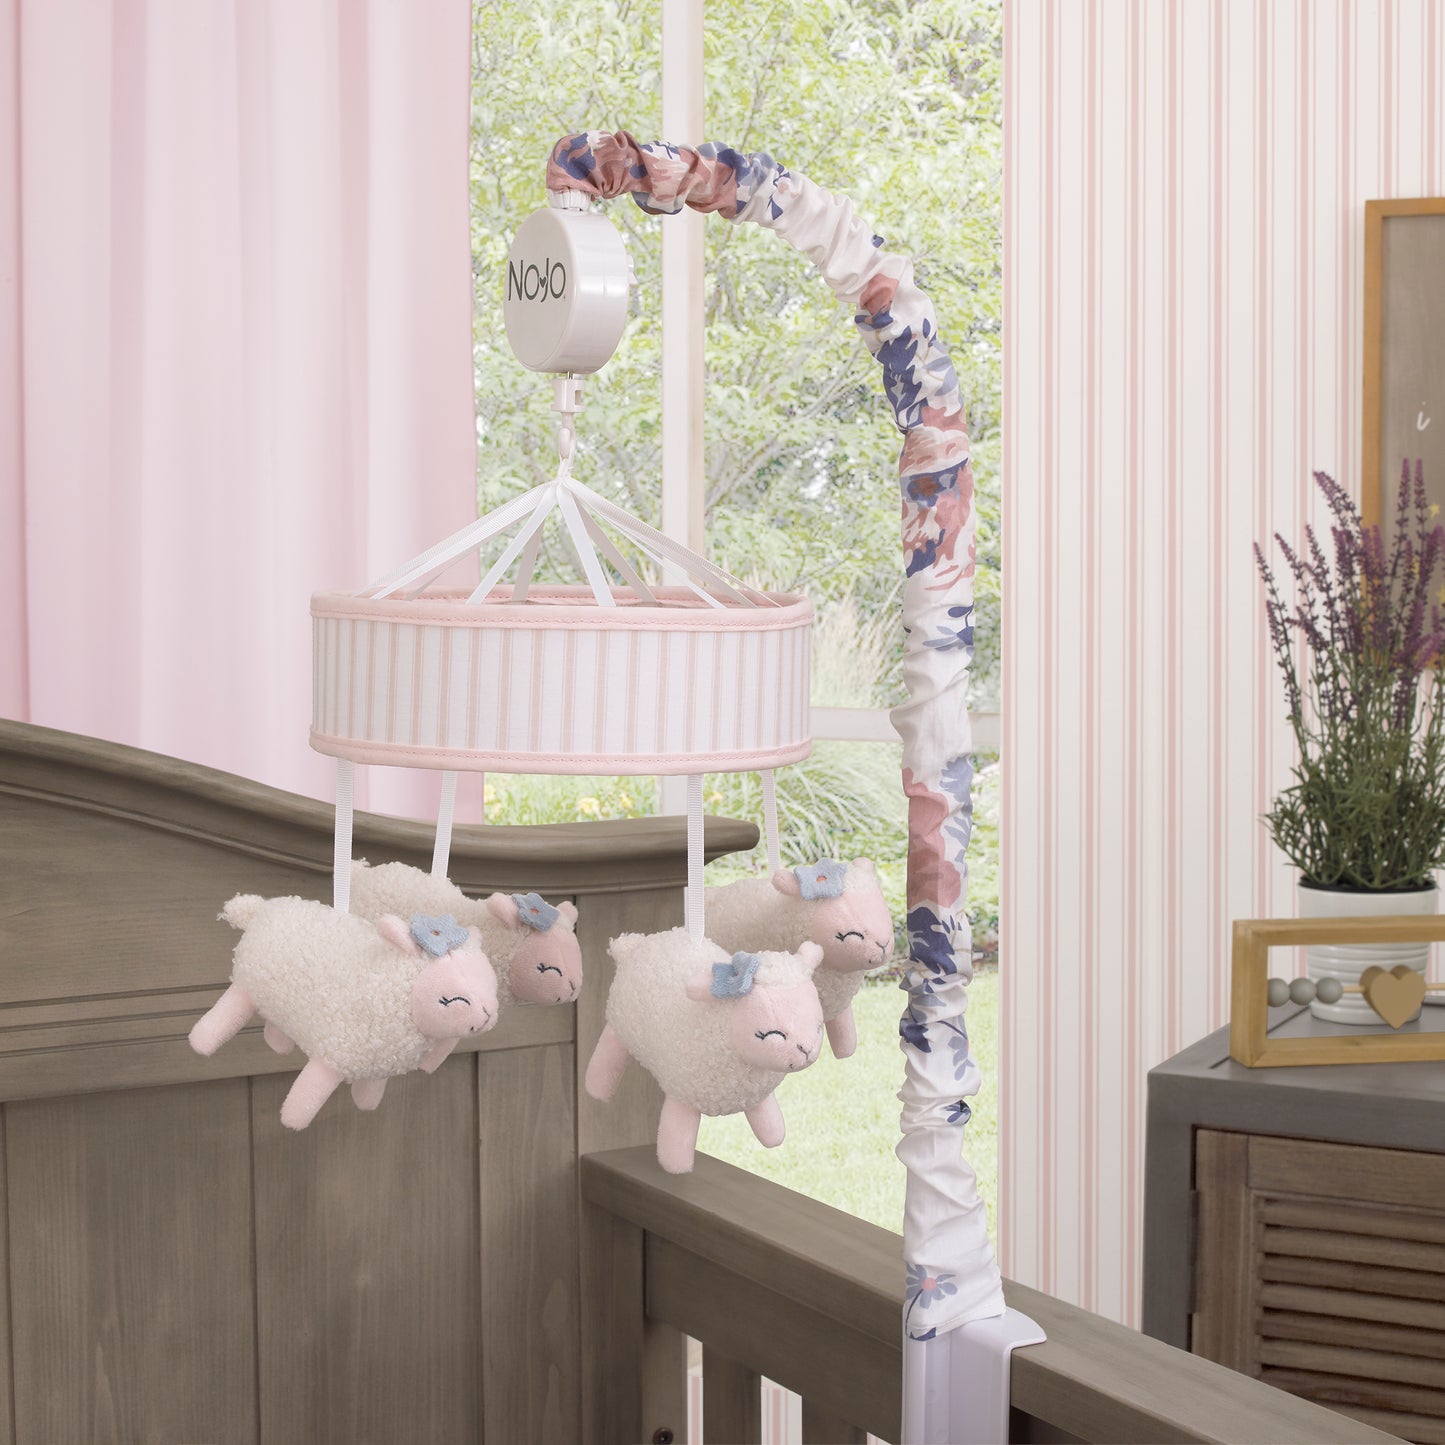 NoJo Farmhouse Chic Pink and White Stripe Lamb and Floral Musical Mobile